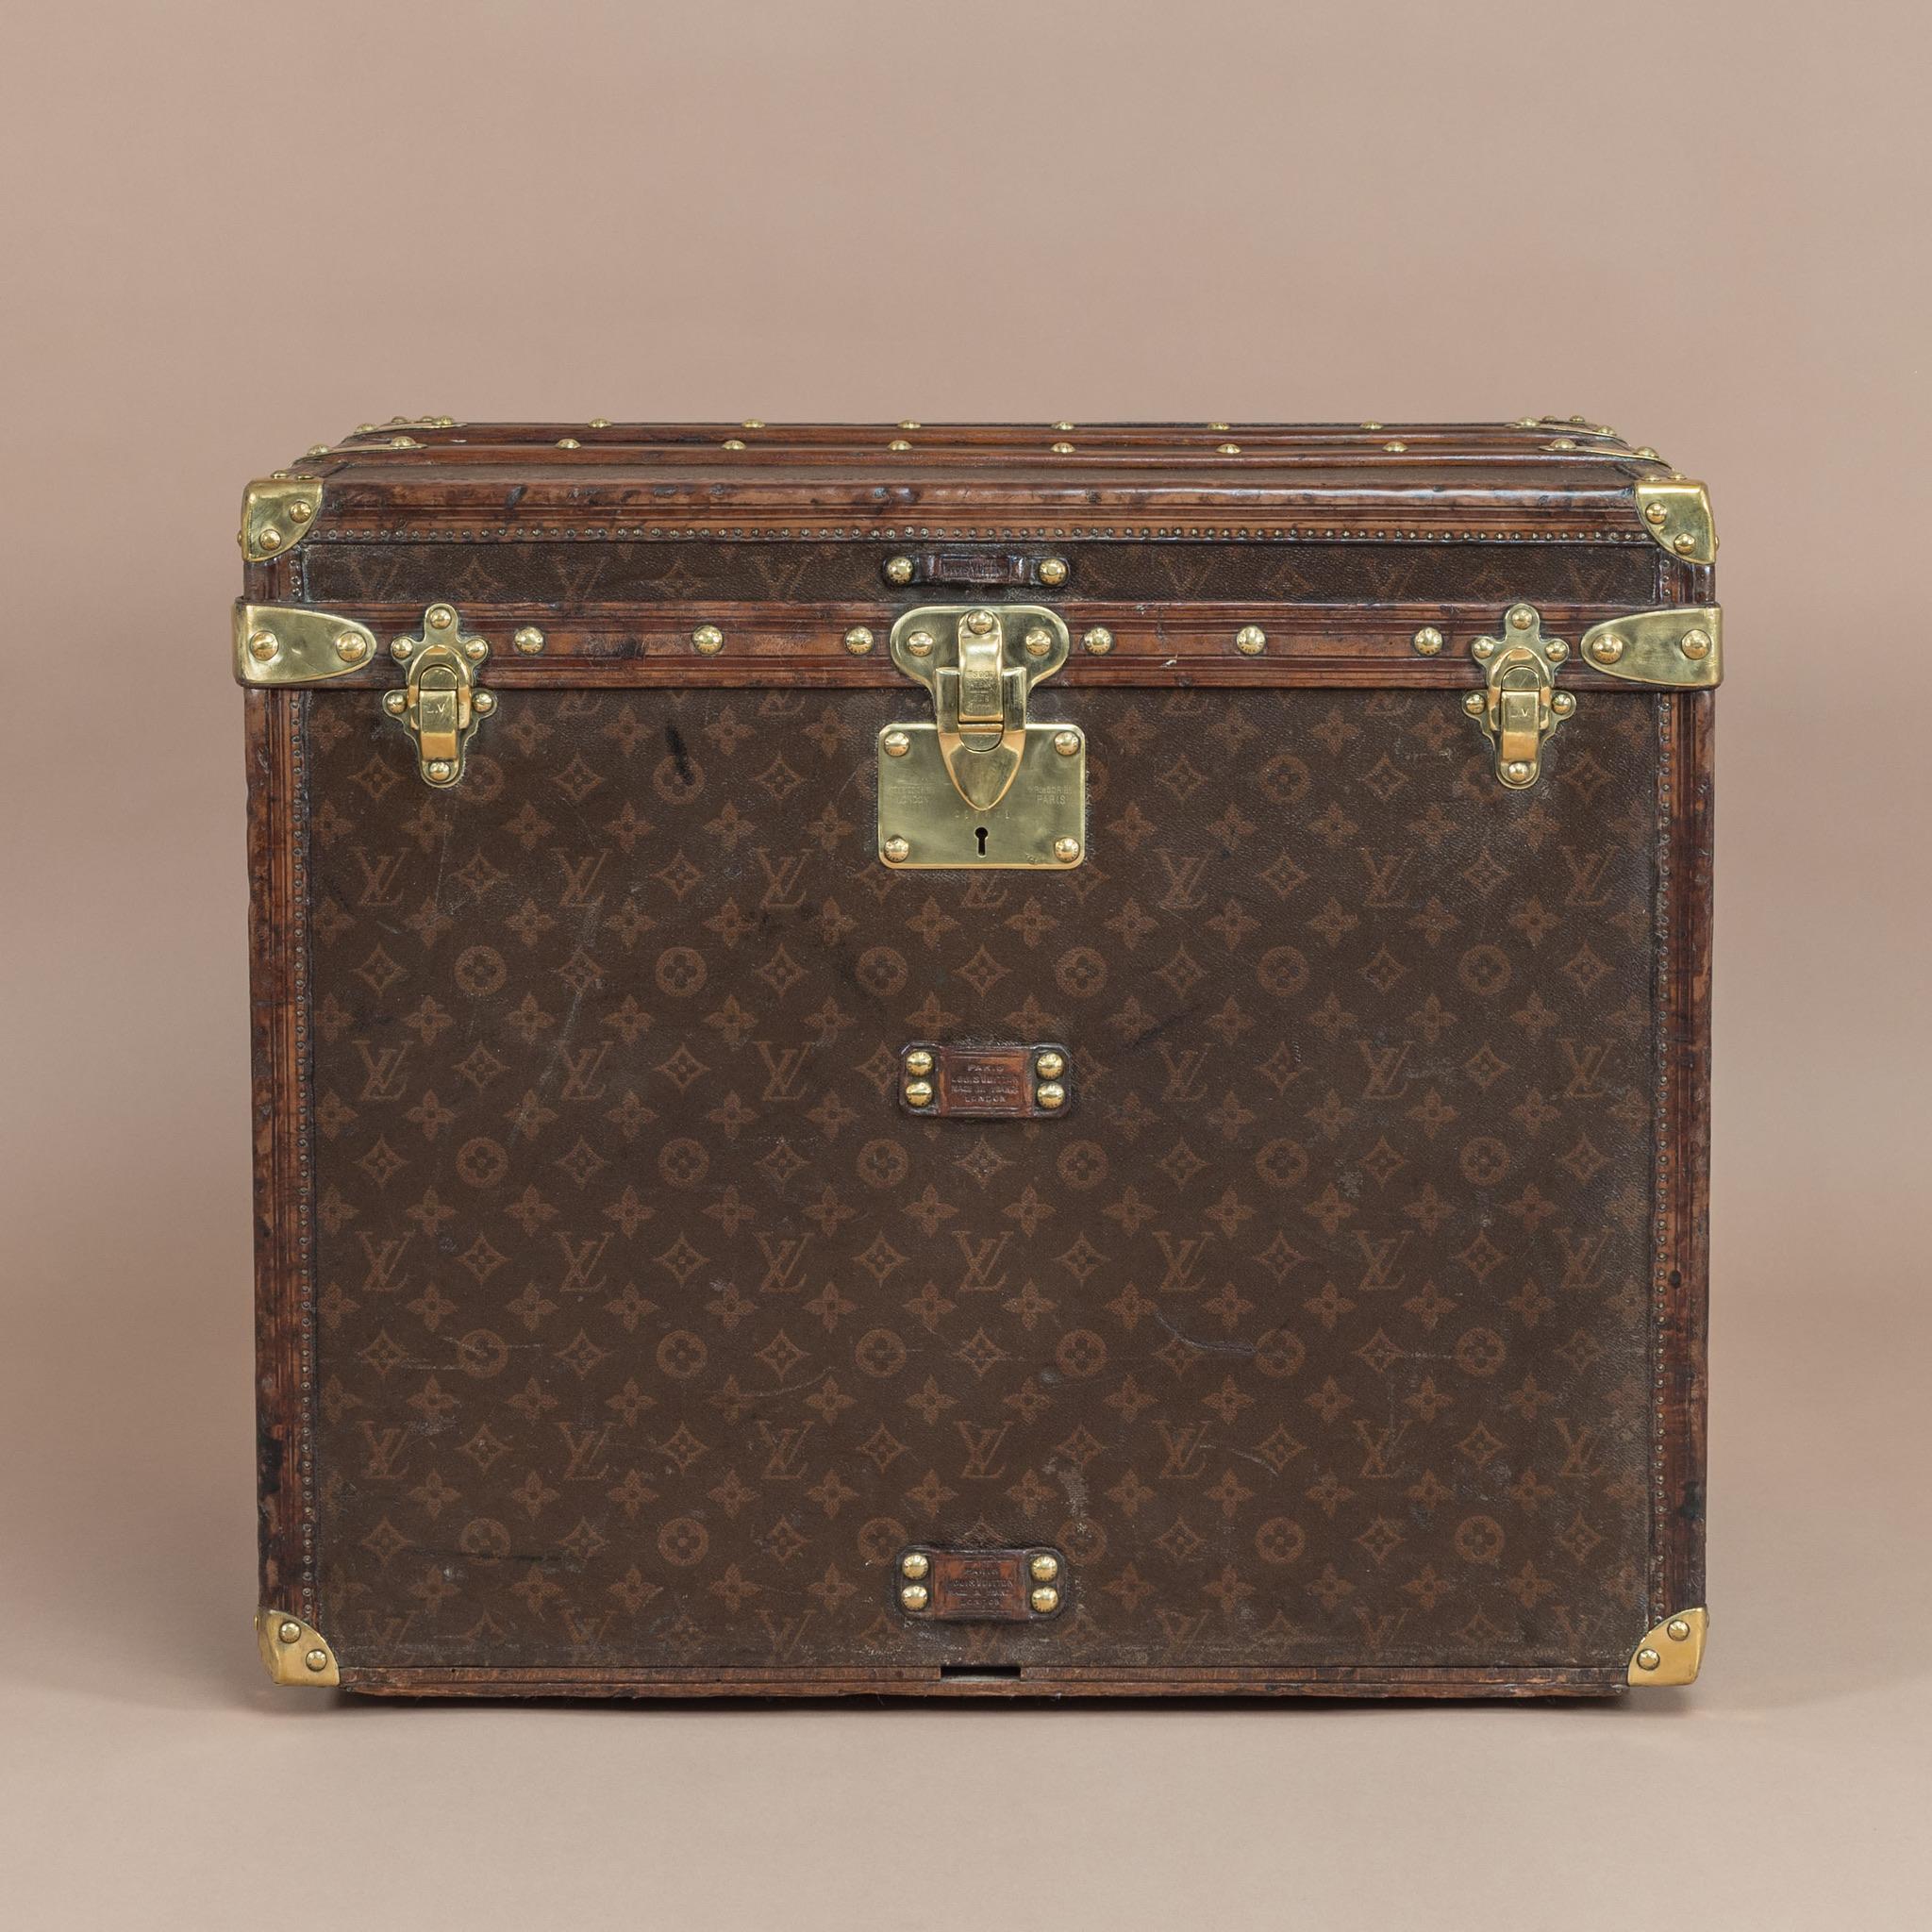 A stunning Louis Vuitton trunk circa 1905 with LV monogram pattern canvas, leather trim, polished brass handles & fittings, original lining and all the felt lined trays. Also includes an original key.

Louis Vuitton was founded by its namesake in